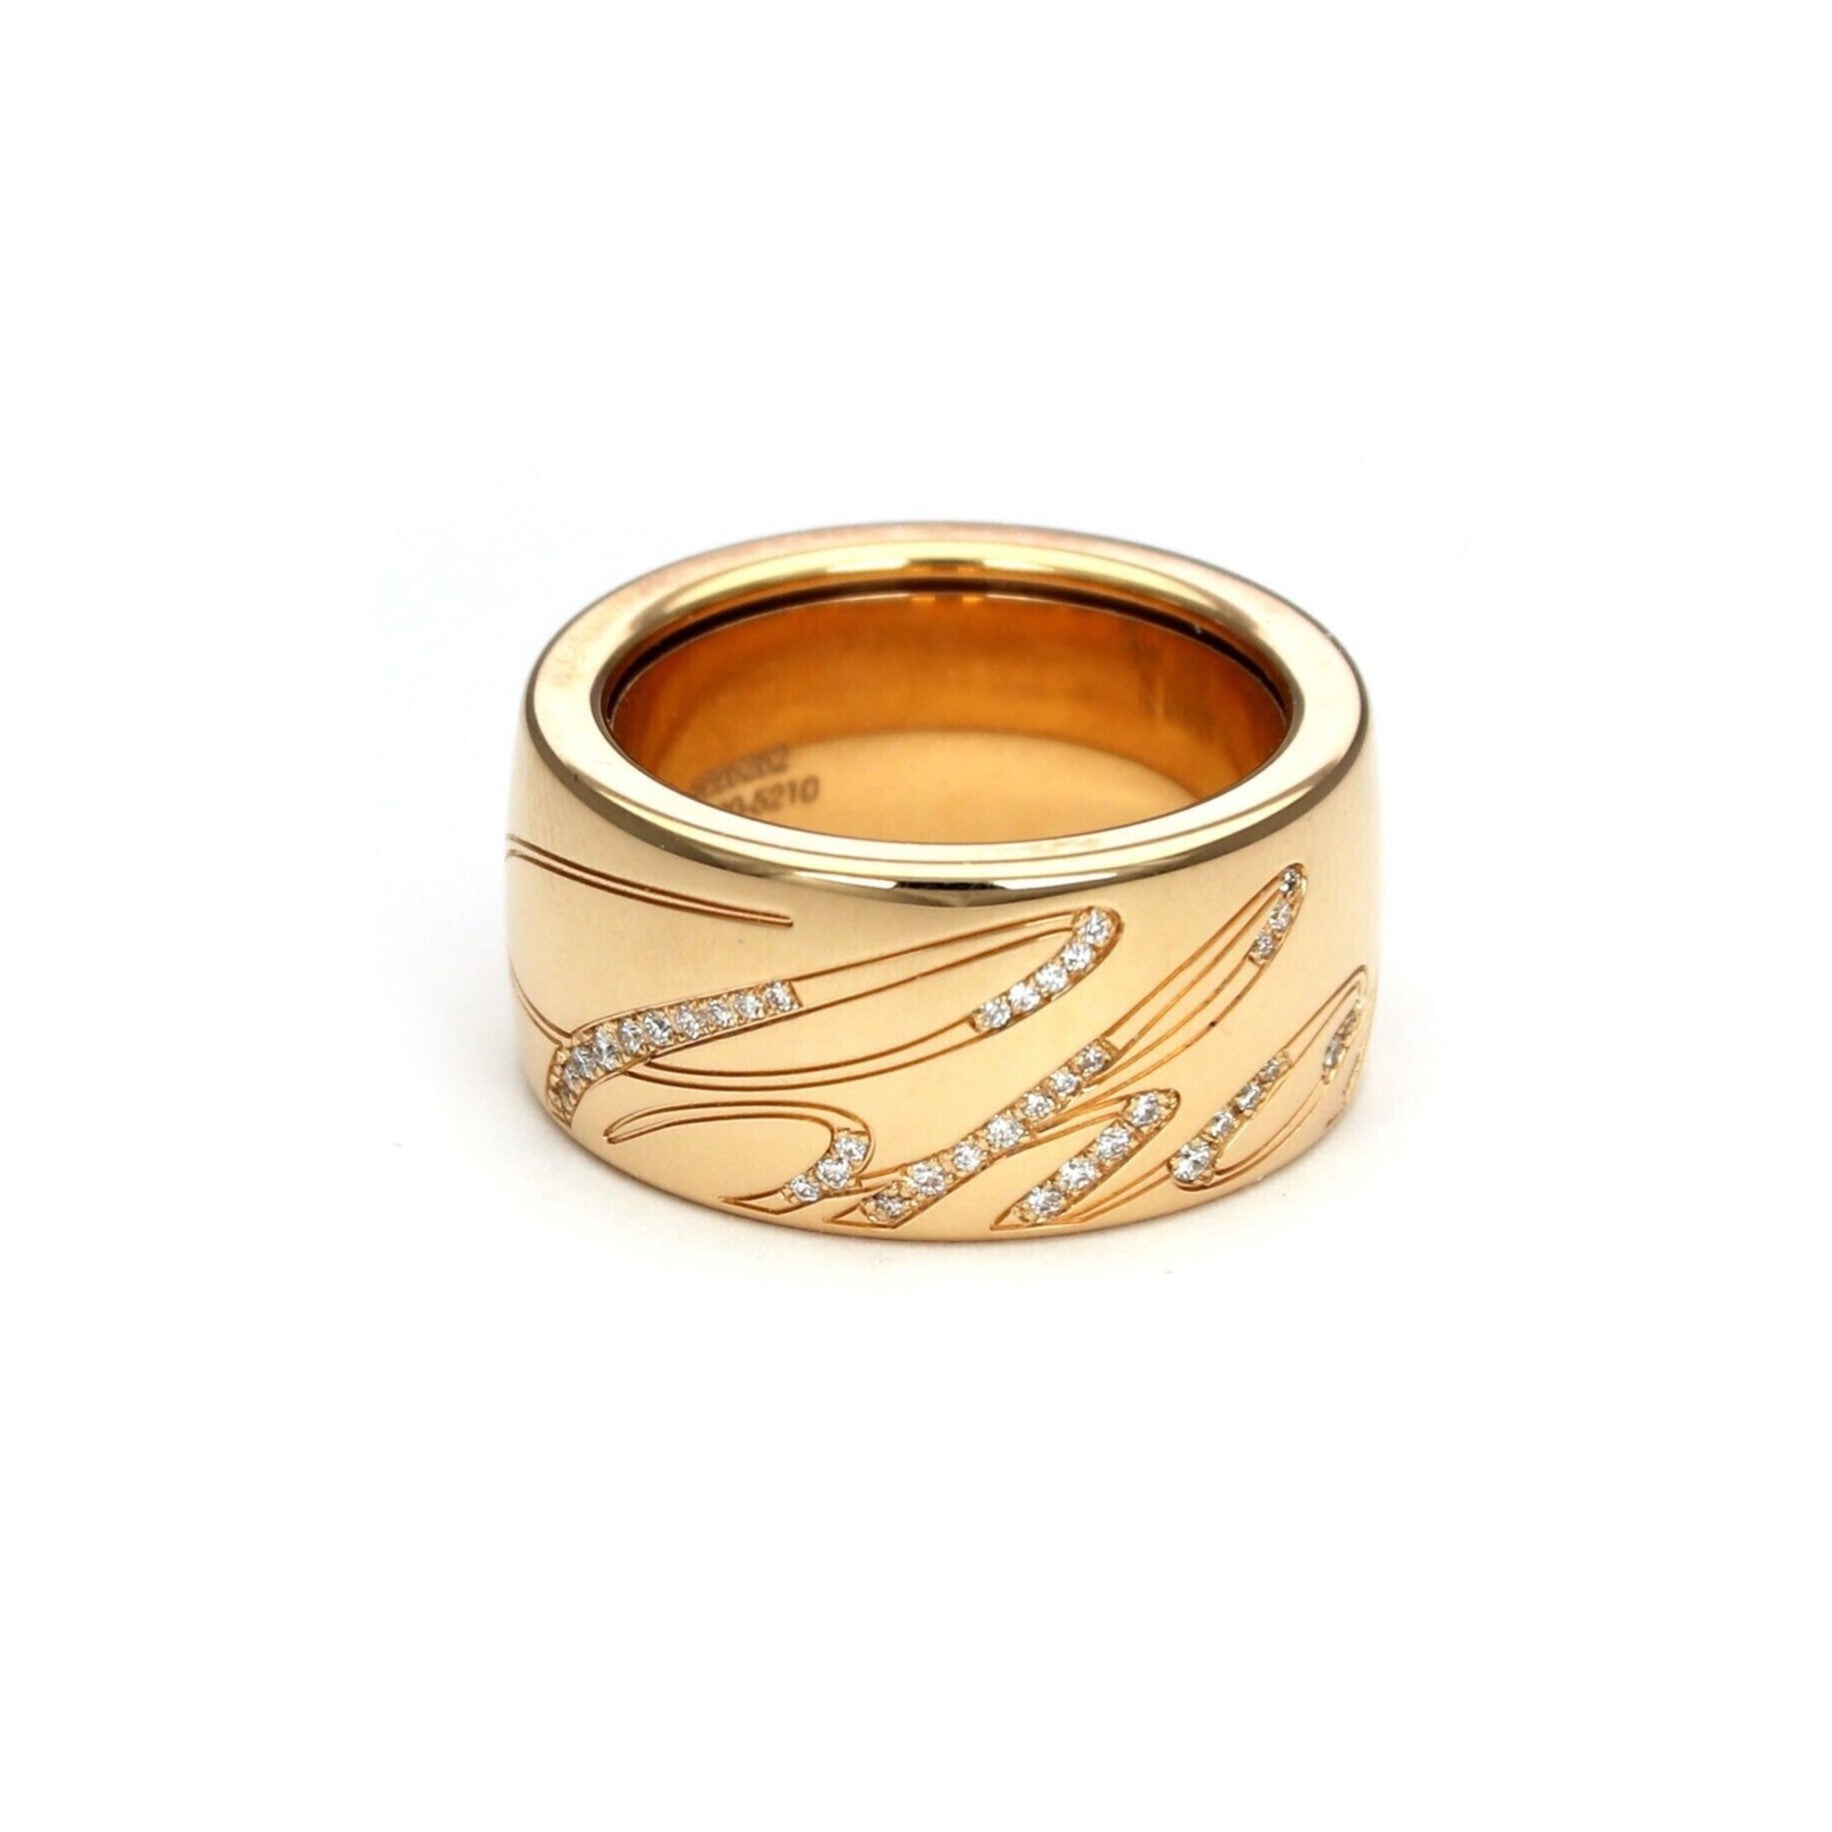 Candere Zainab Kyra Gold Ring Price Starting From Rs 7,599. Find Verified  Sellers in Mumbai - JdMart